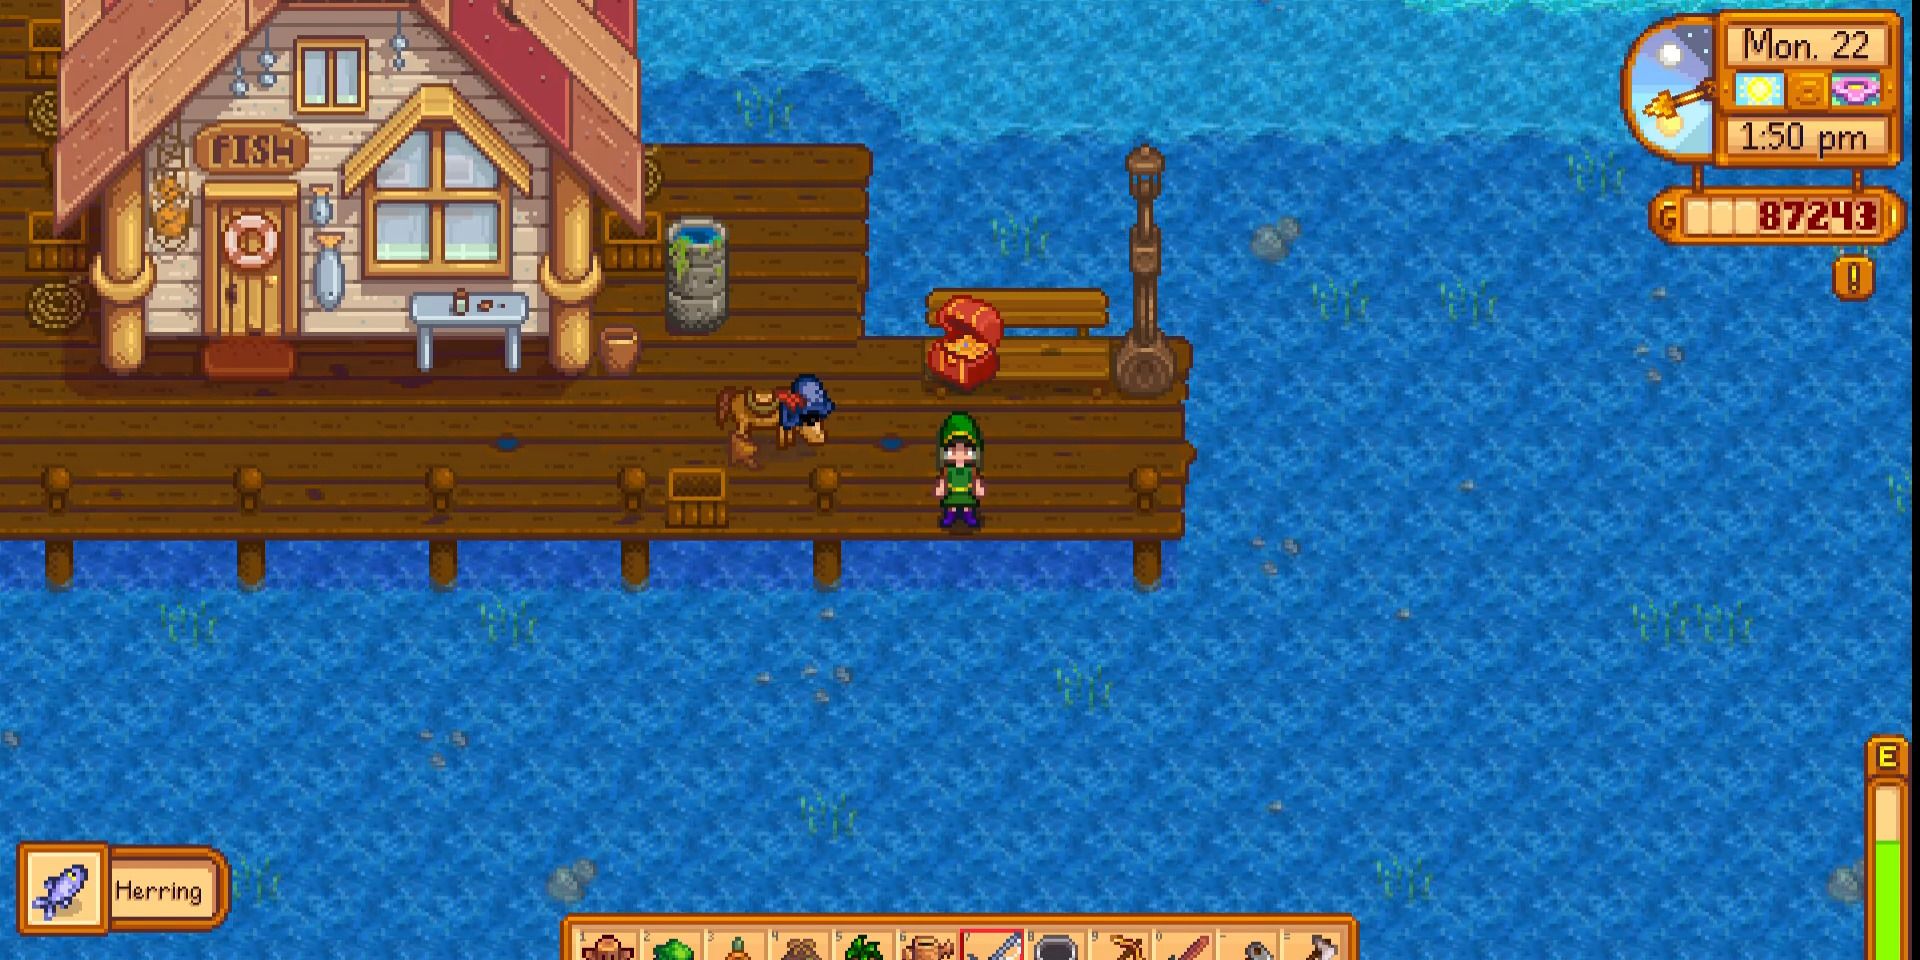 Image of a fishing treasure chest while fishing in Stardew Valley